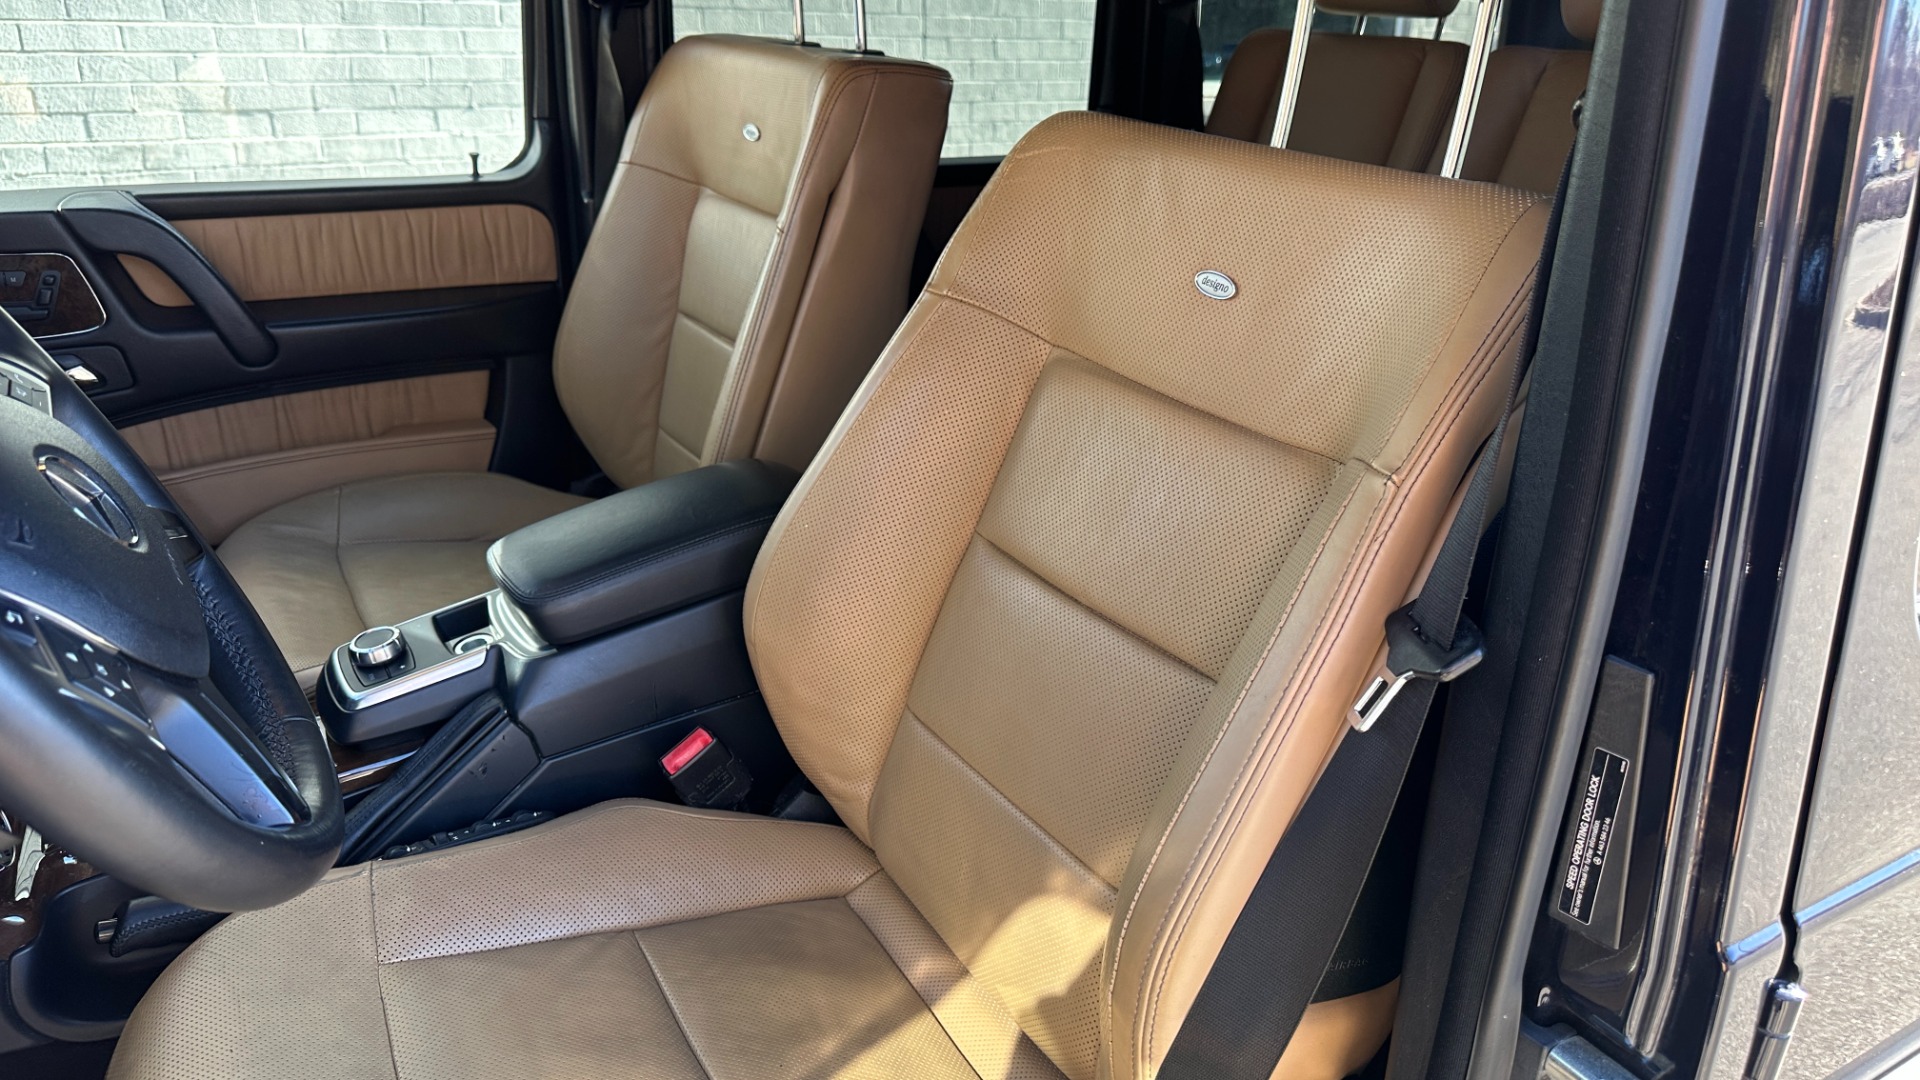 Used 2015 Mercedes-Benz G-Class G550 / DESIGNO NAPPA LEATHER / DESIGNO HEADLINER / HEATED STEERING / NAV /  for sale Sold at Formula Imports in Charlotte NC 28227 14